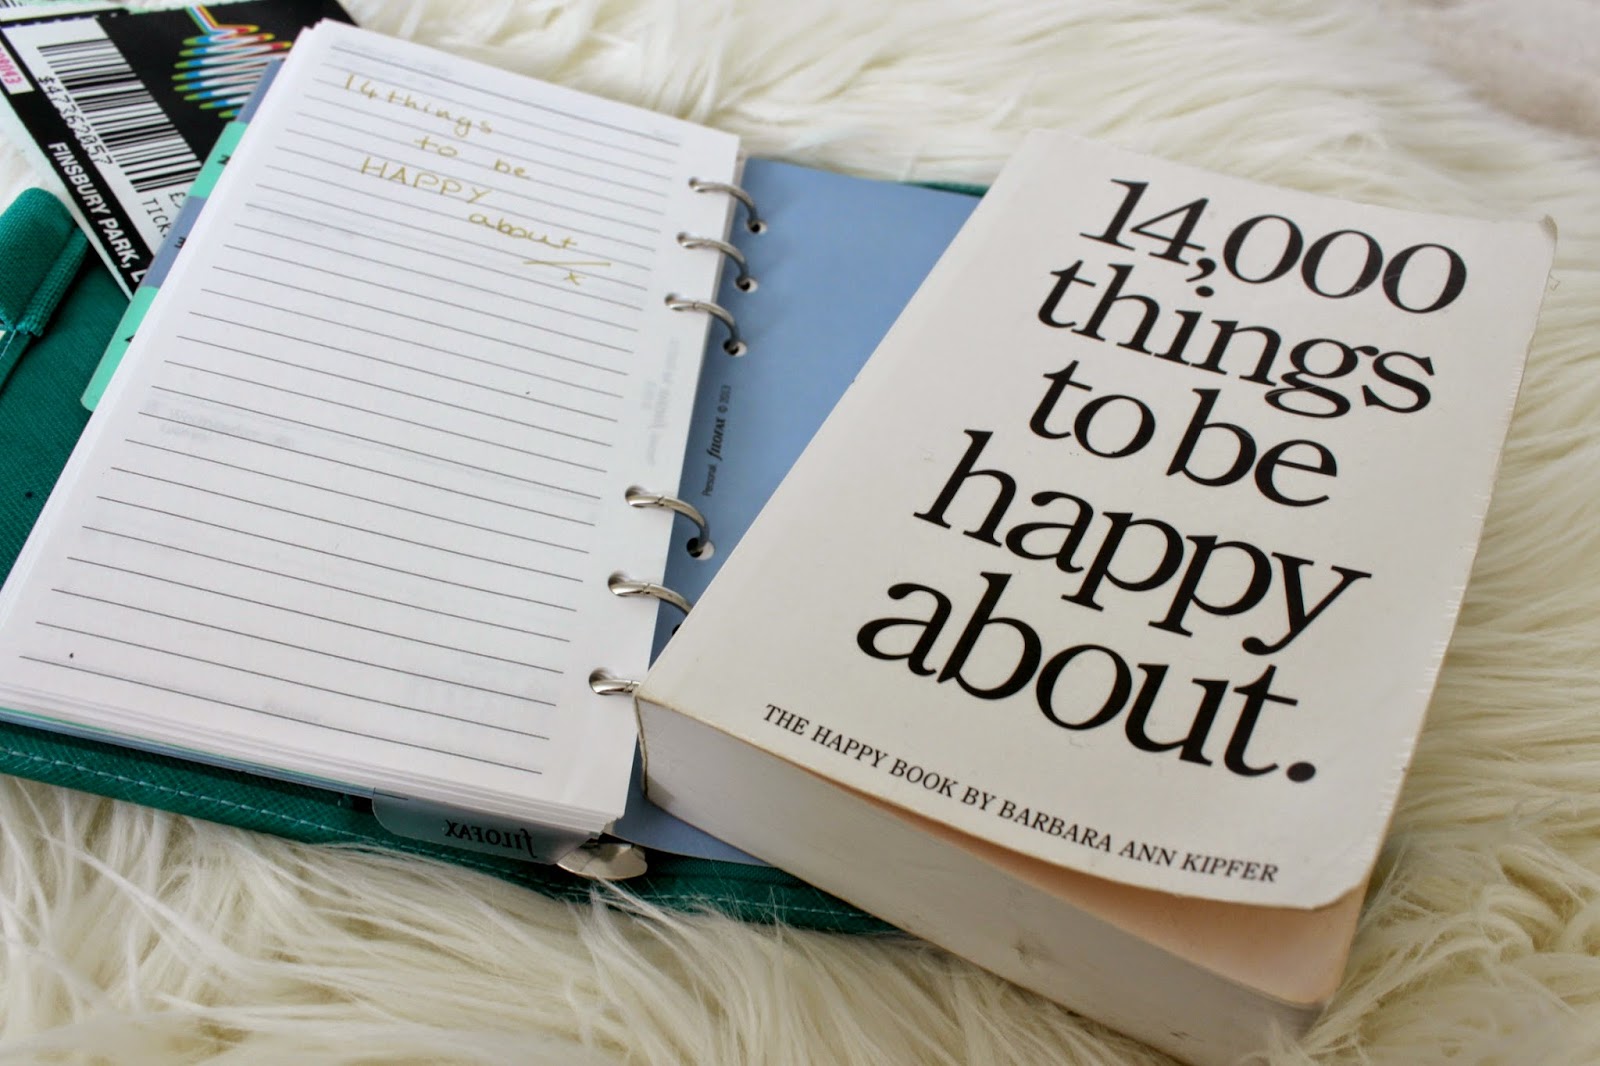 14 000 things to be happy about pdf download free